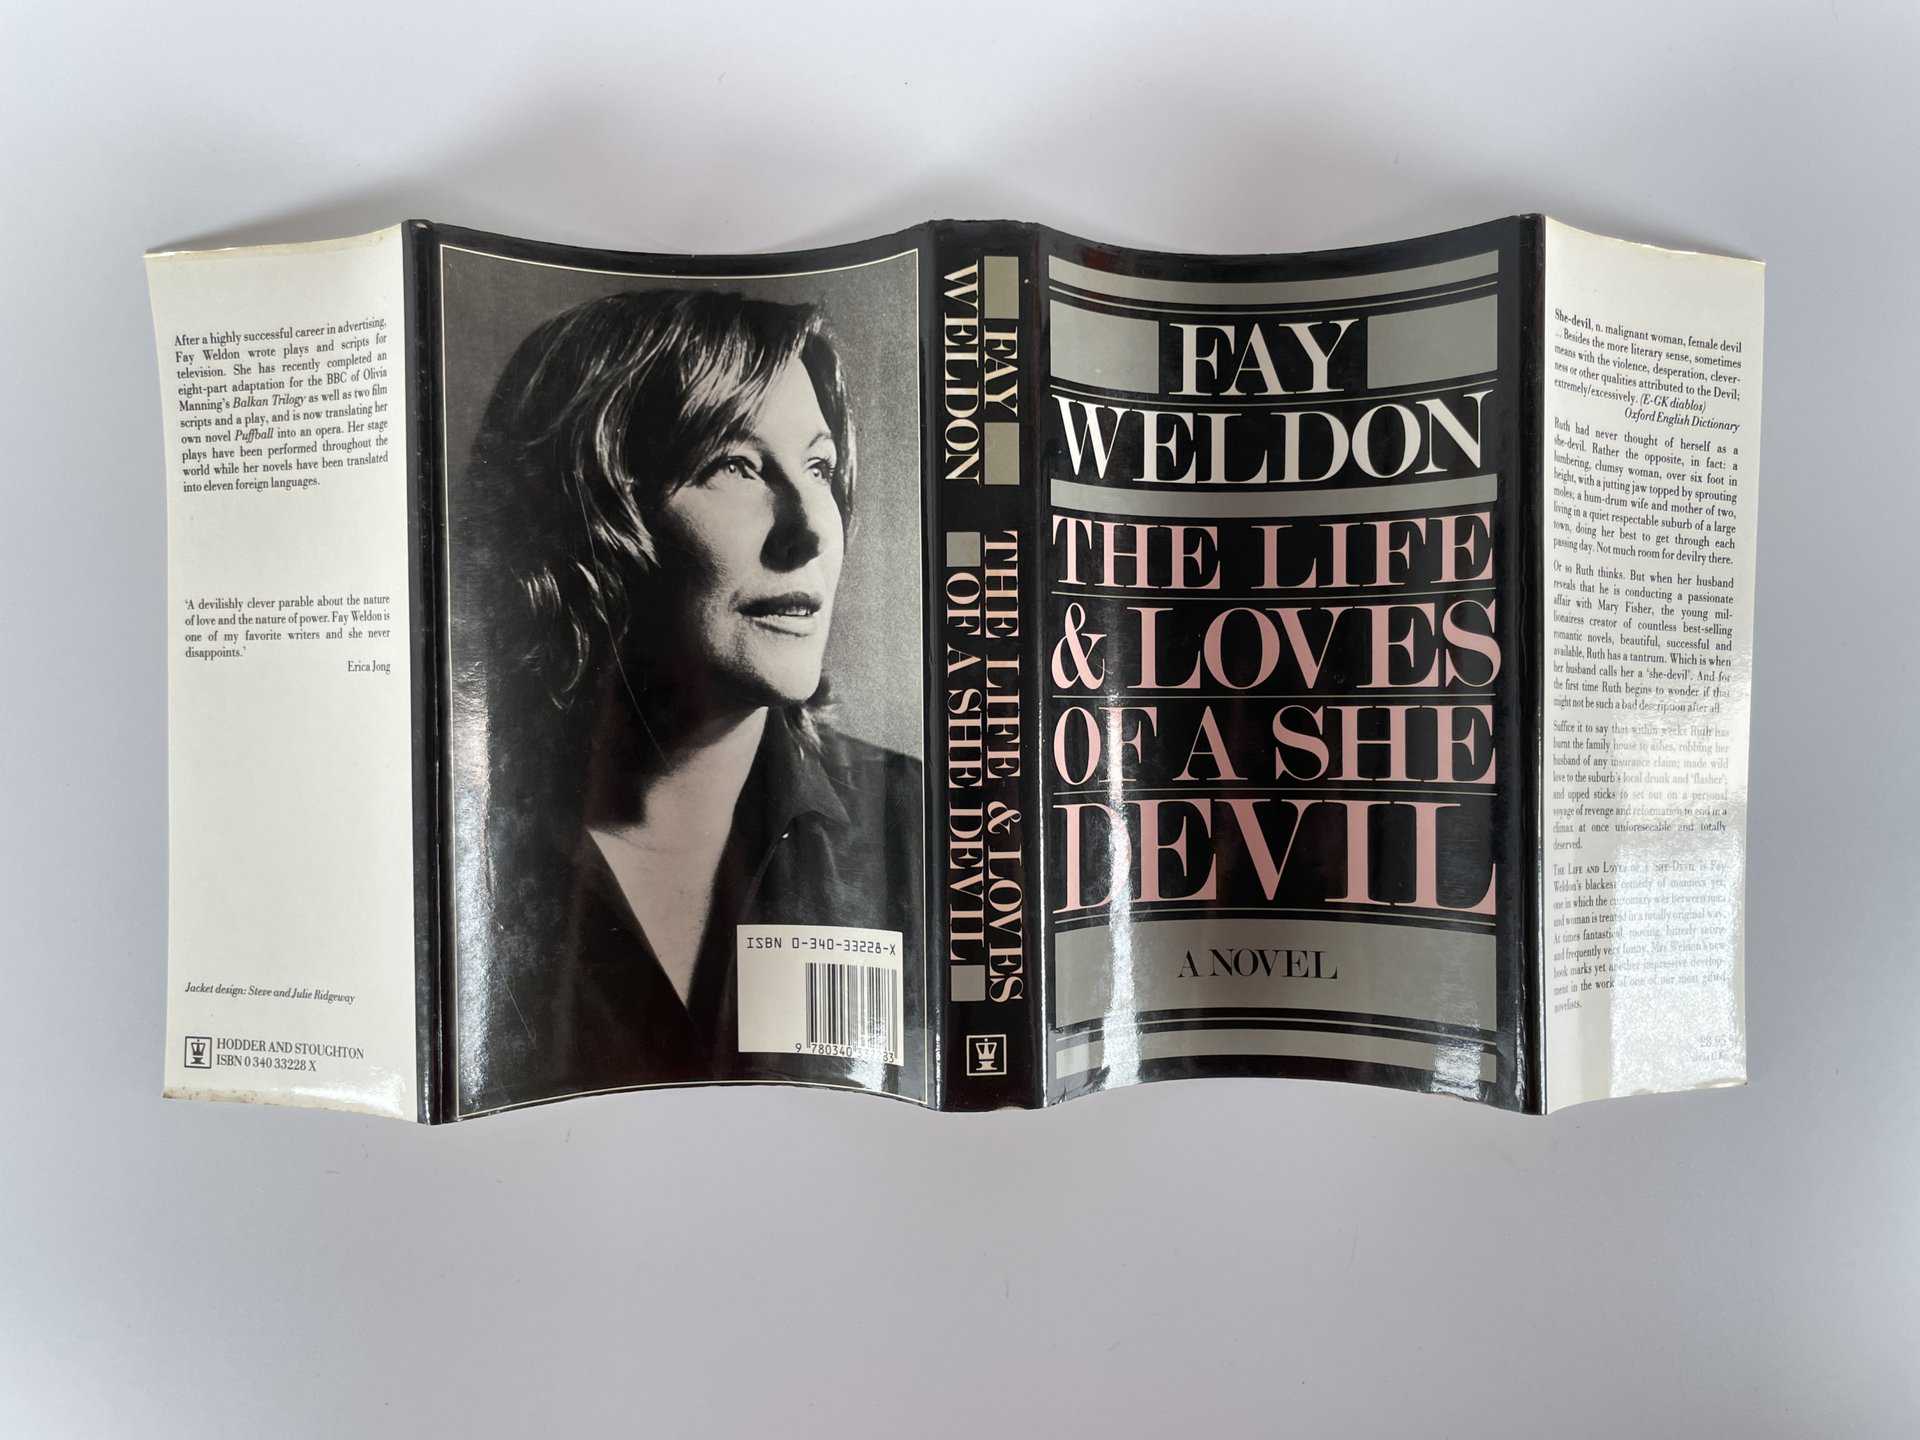 fay weldon the life and loves of a she devil first 3